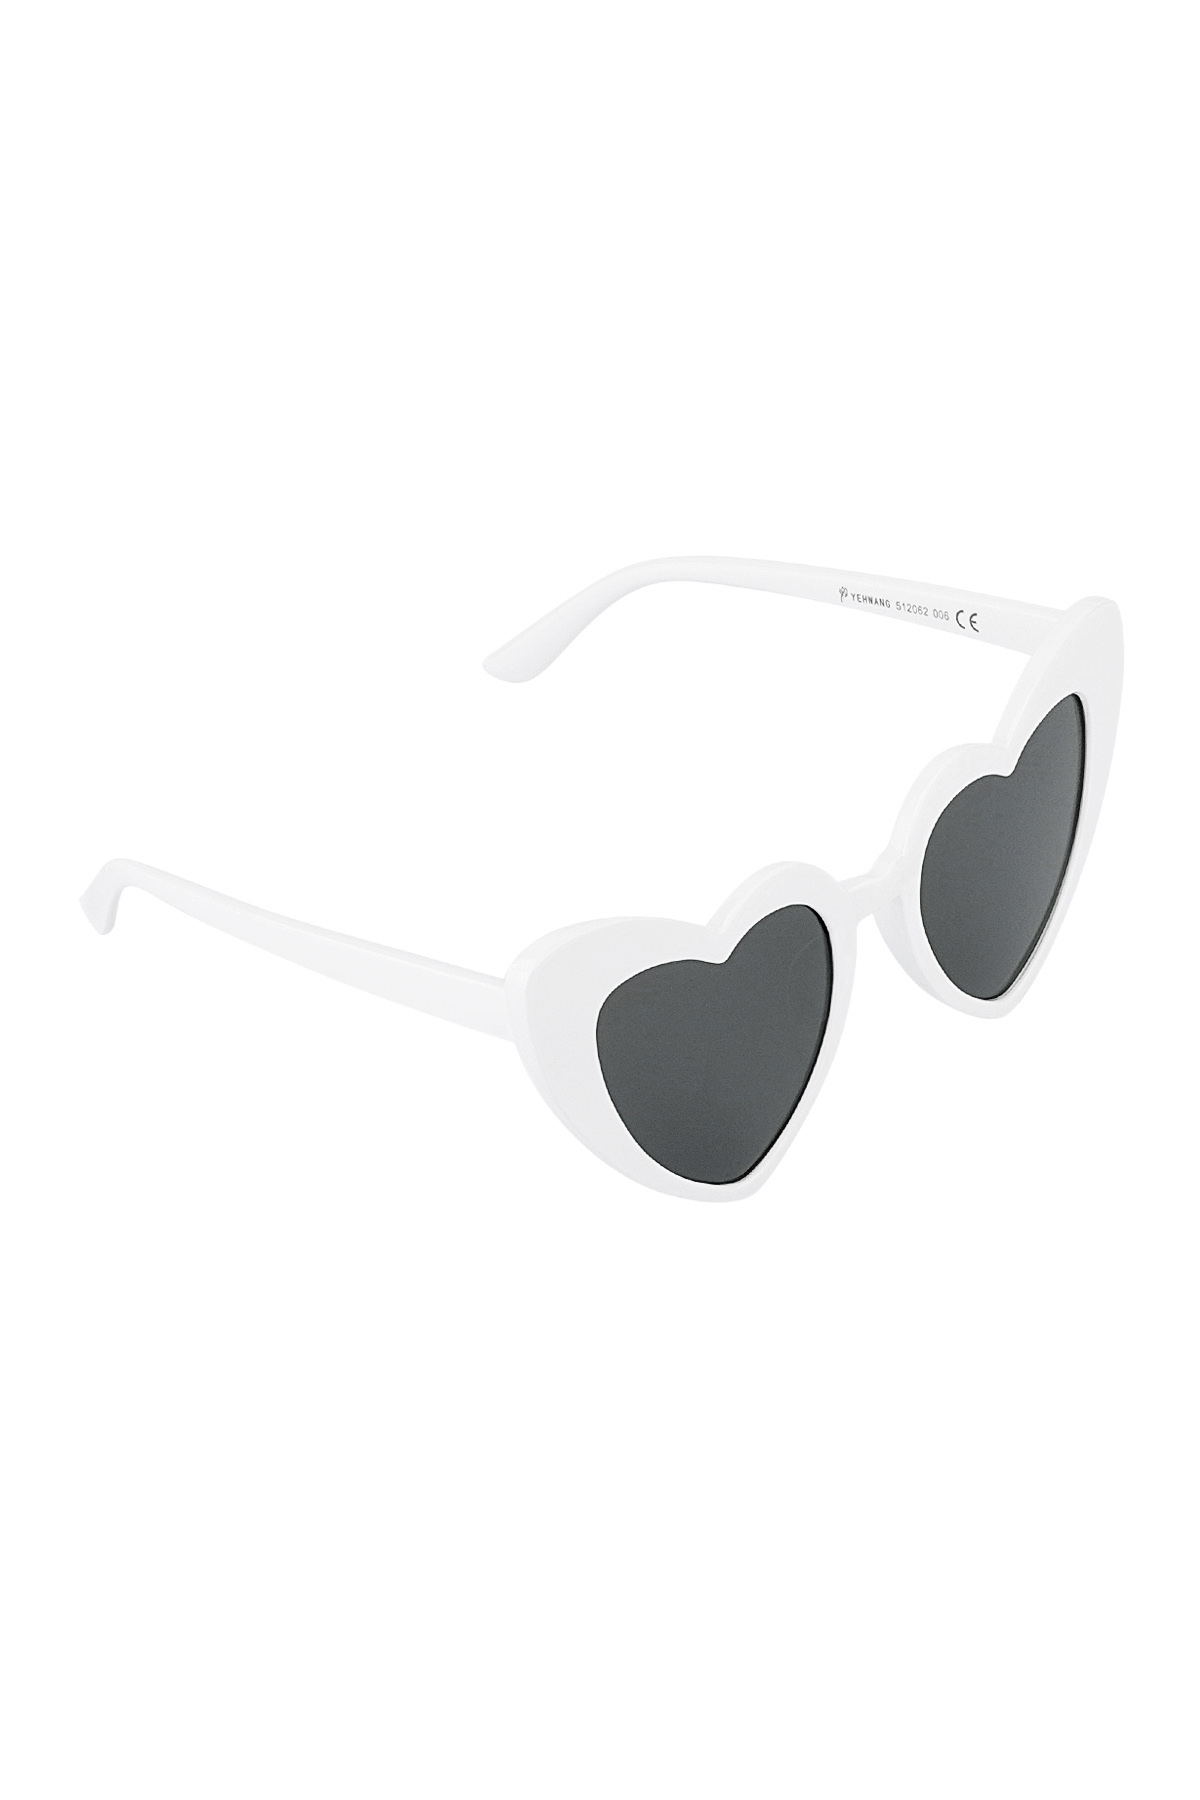 Sunglasses love is in the air - black and white